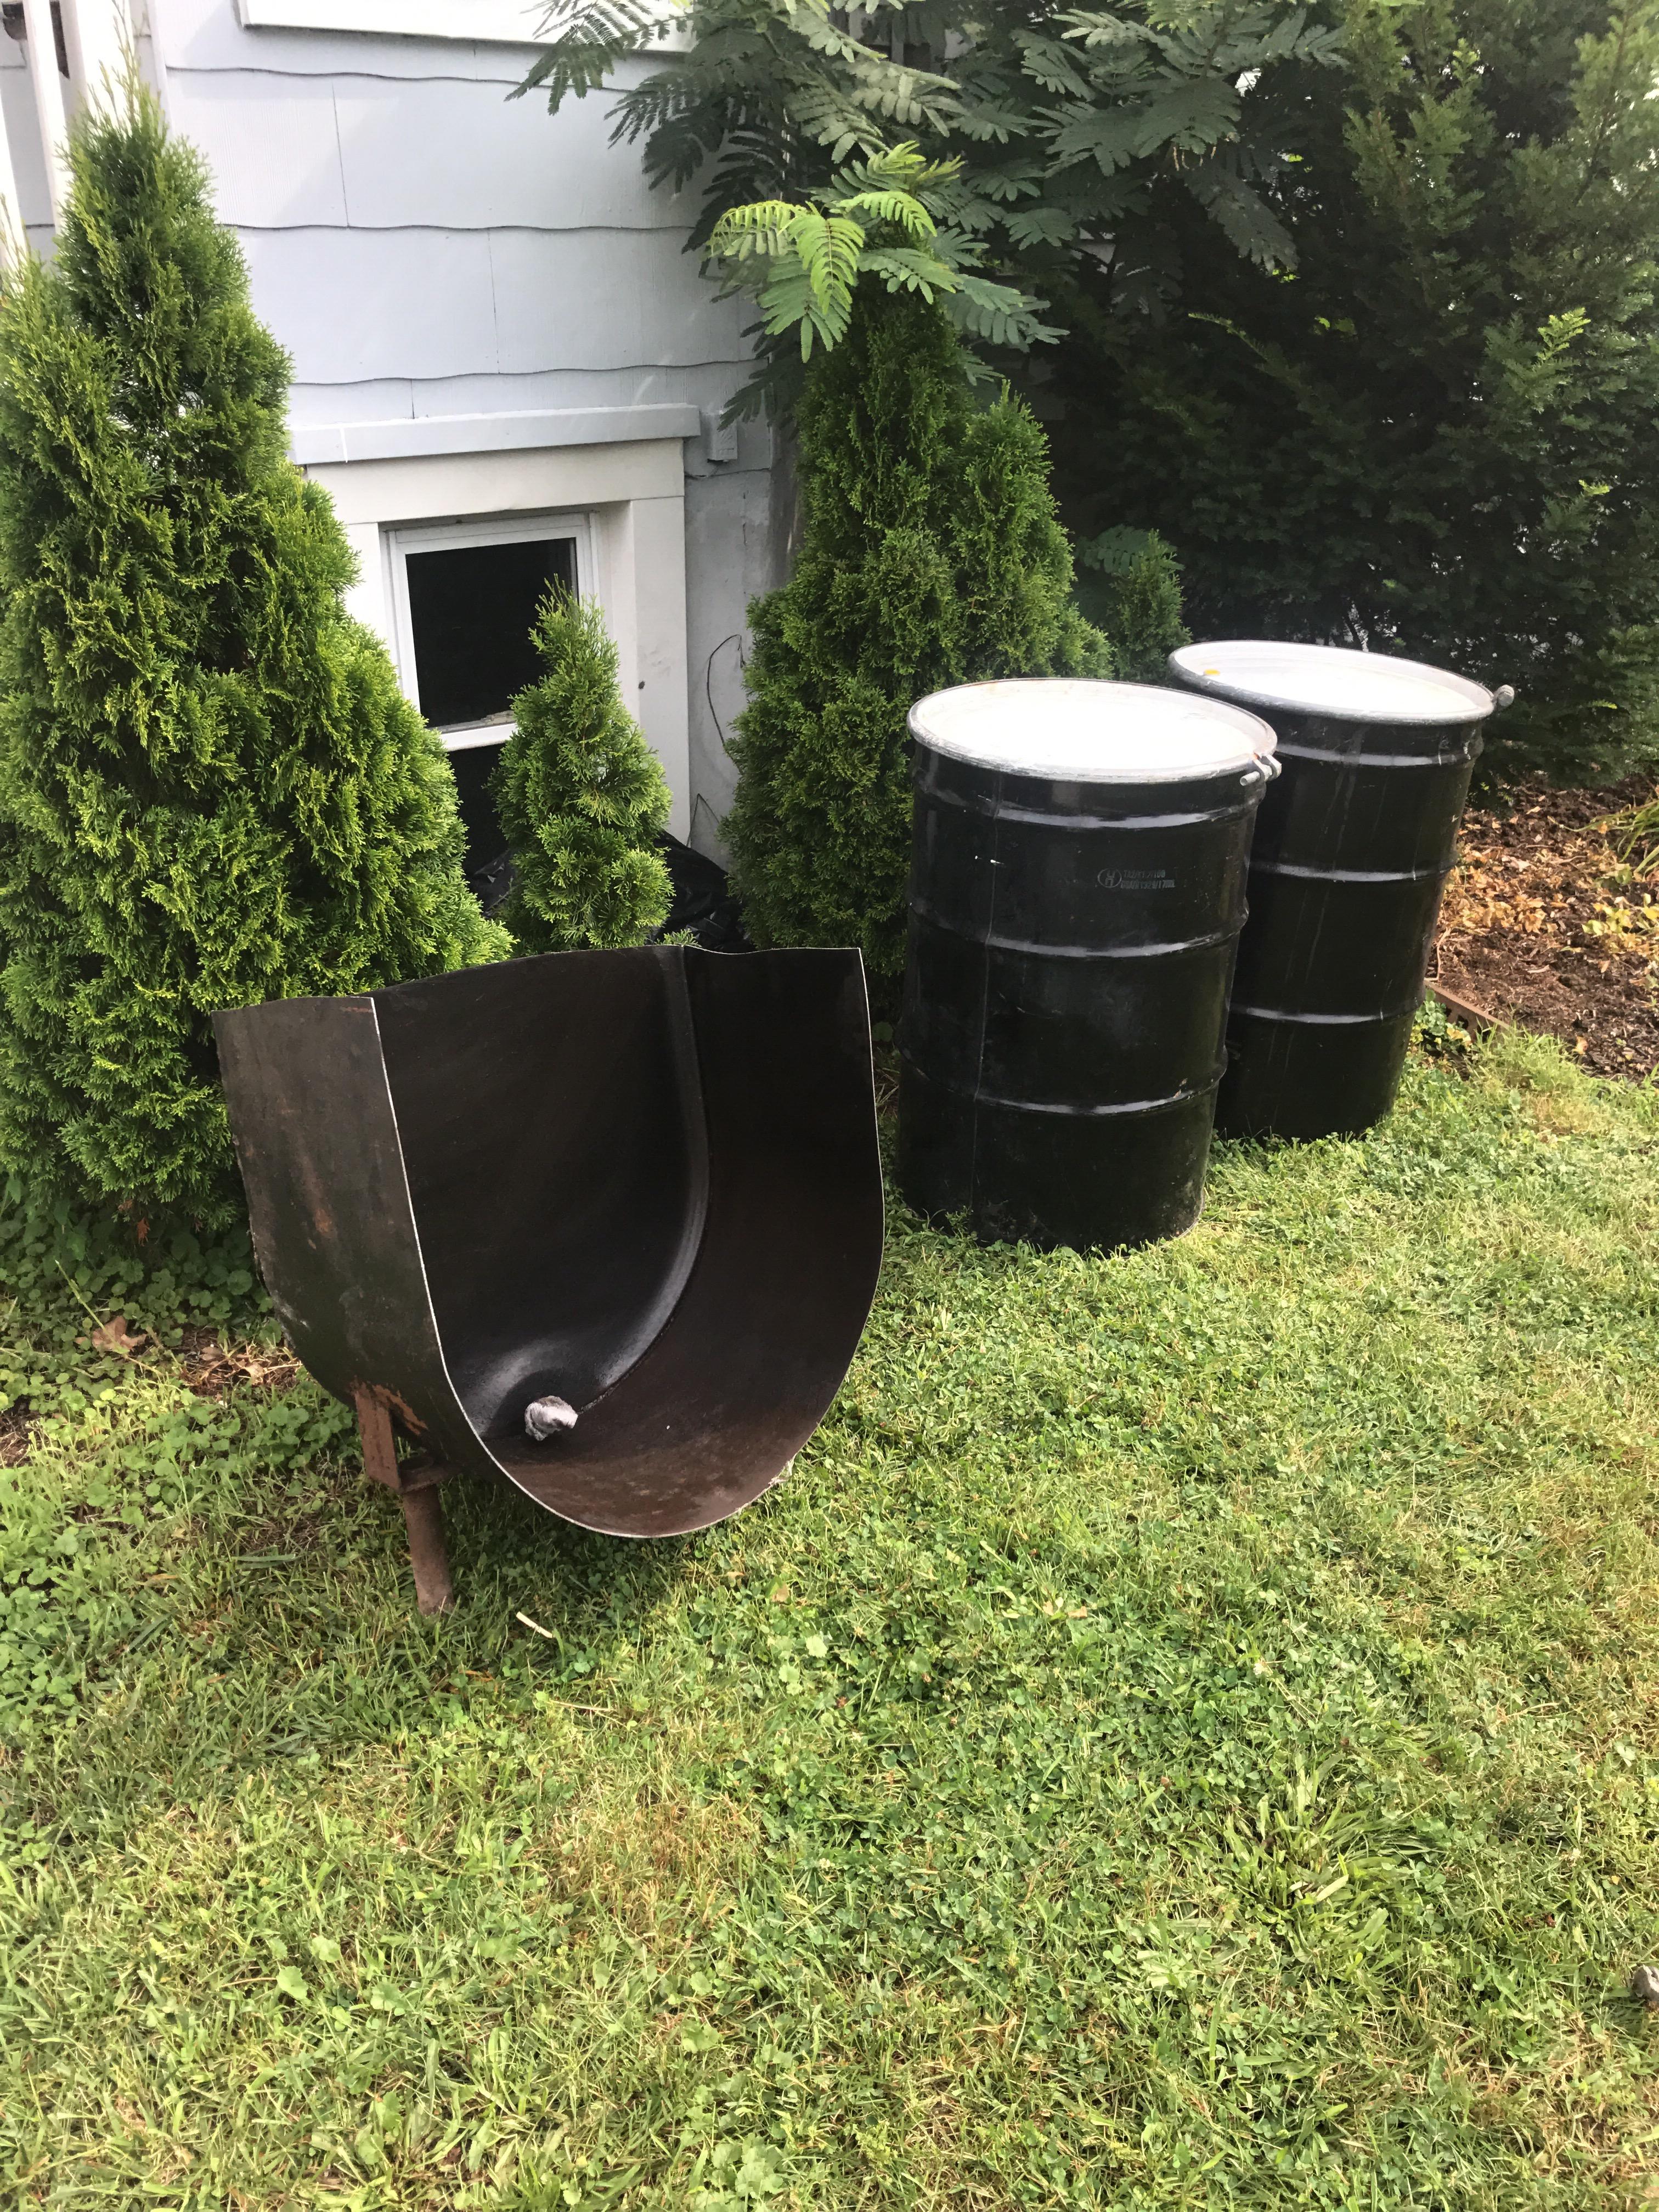 Residential heating Oil AST removal